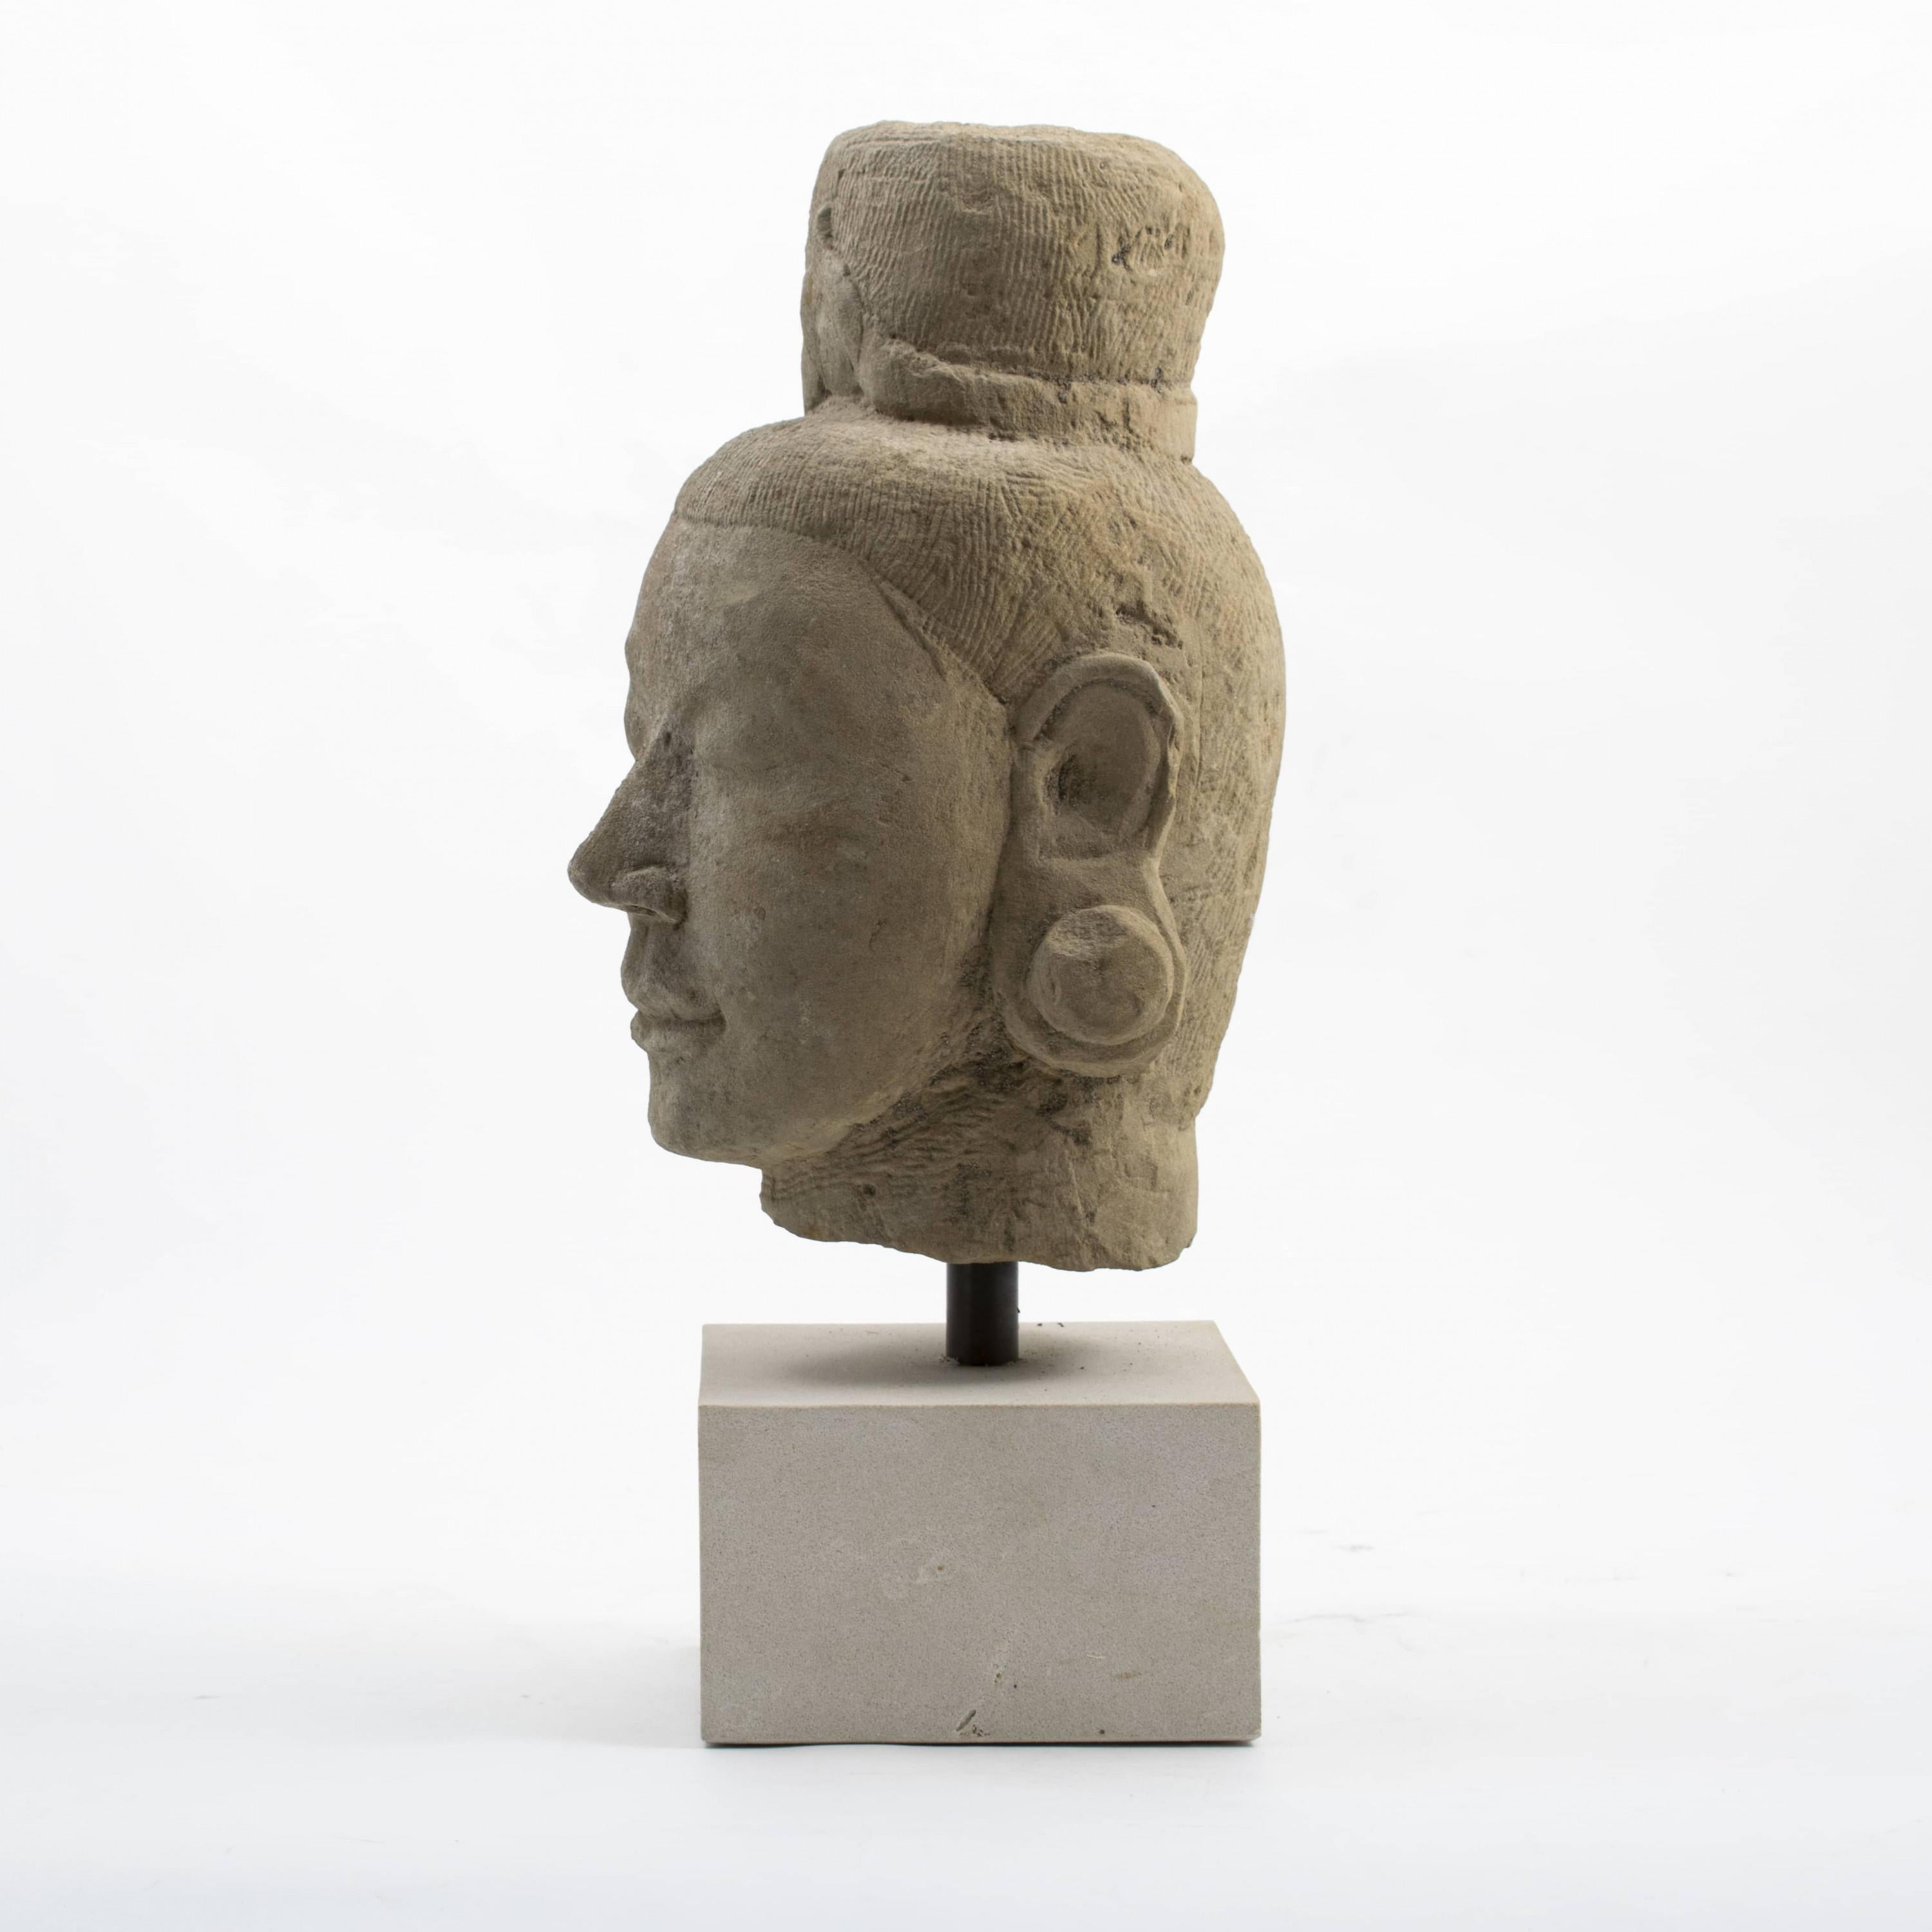 300-400 years old sculpture of a female head carved in sandstone.
Mounted on a base of light sandstone.
From pagoda / Buddha temple in Arakan, Burma.

Charming expression with good patina.

Measures: Height with base: 47 cm. - without base: 37